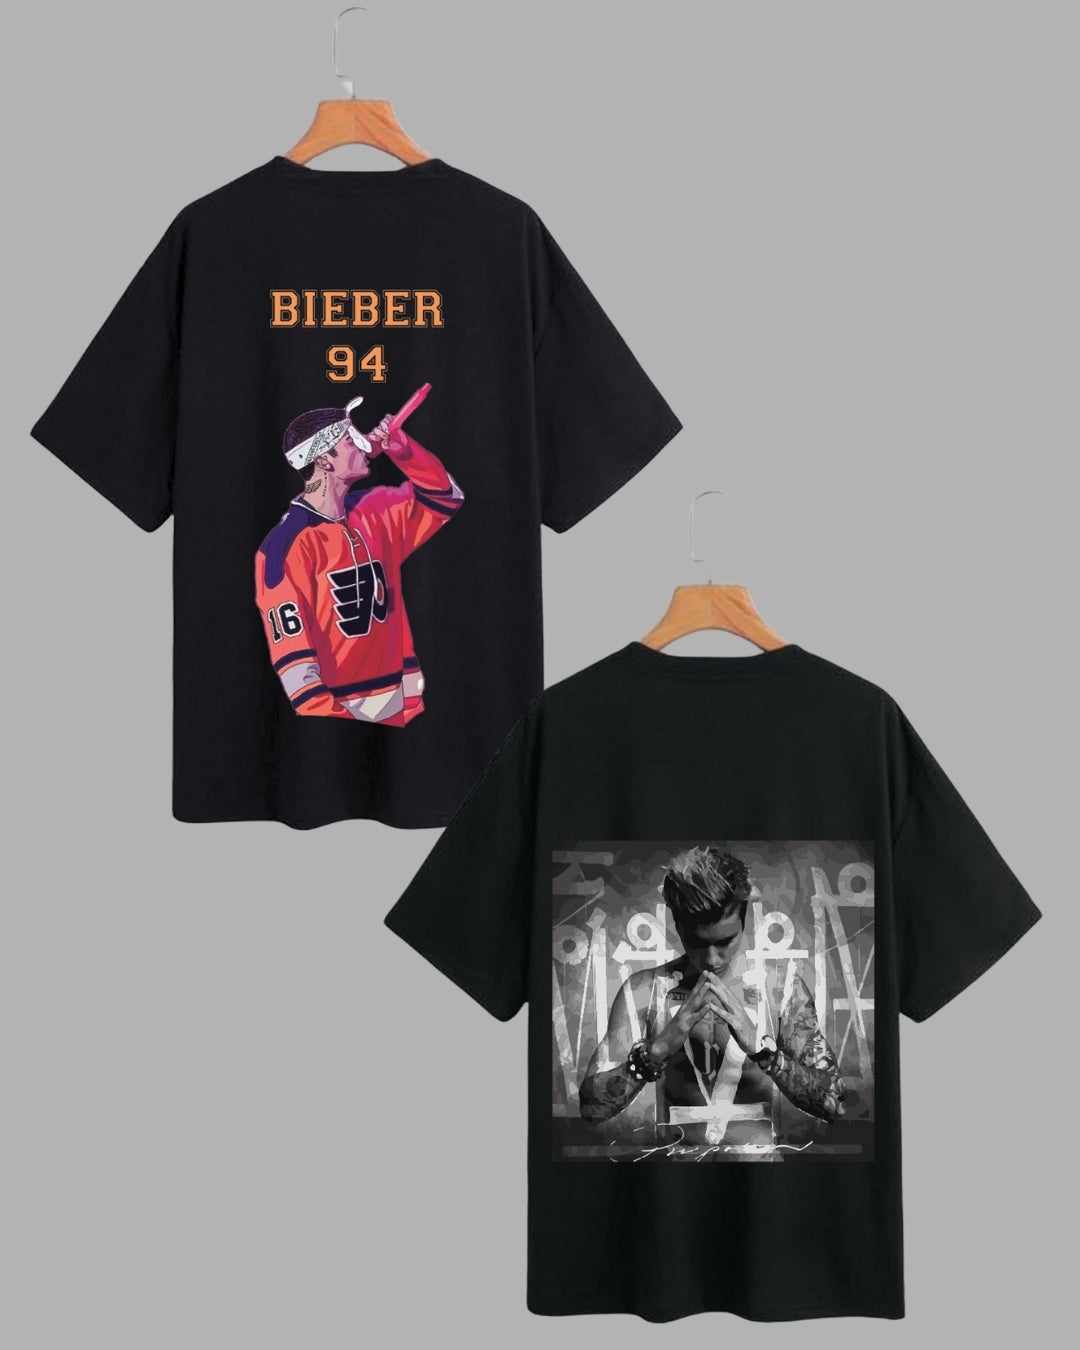 Justin Bieber Duo: Oversized Tees - Bieber 94 & What Do You Mean (Pack of 2)